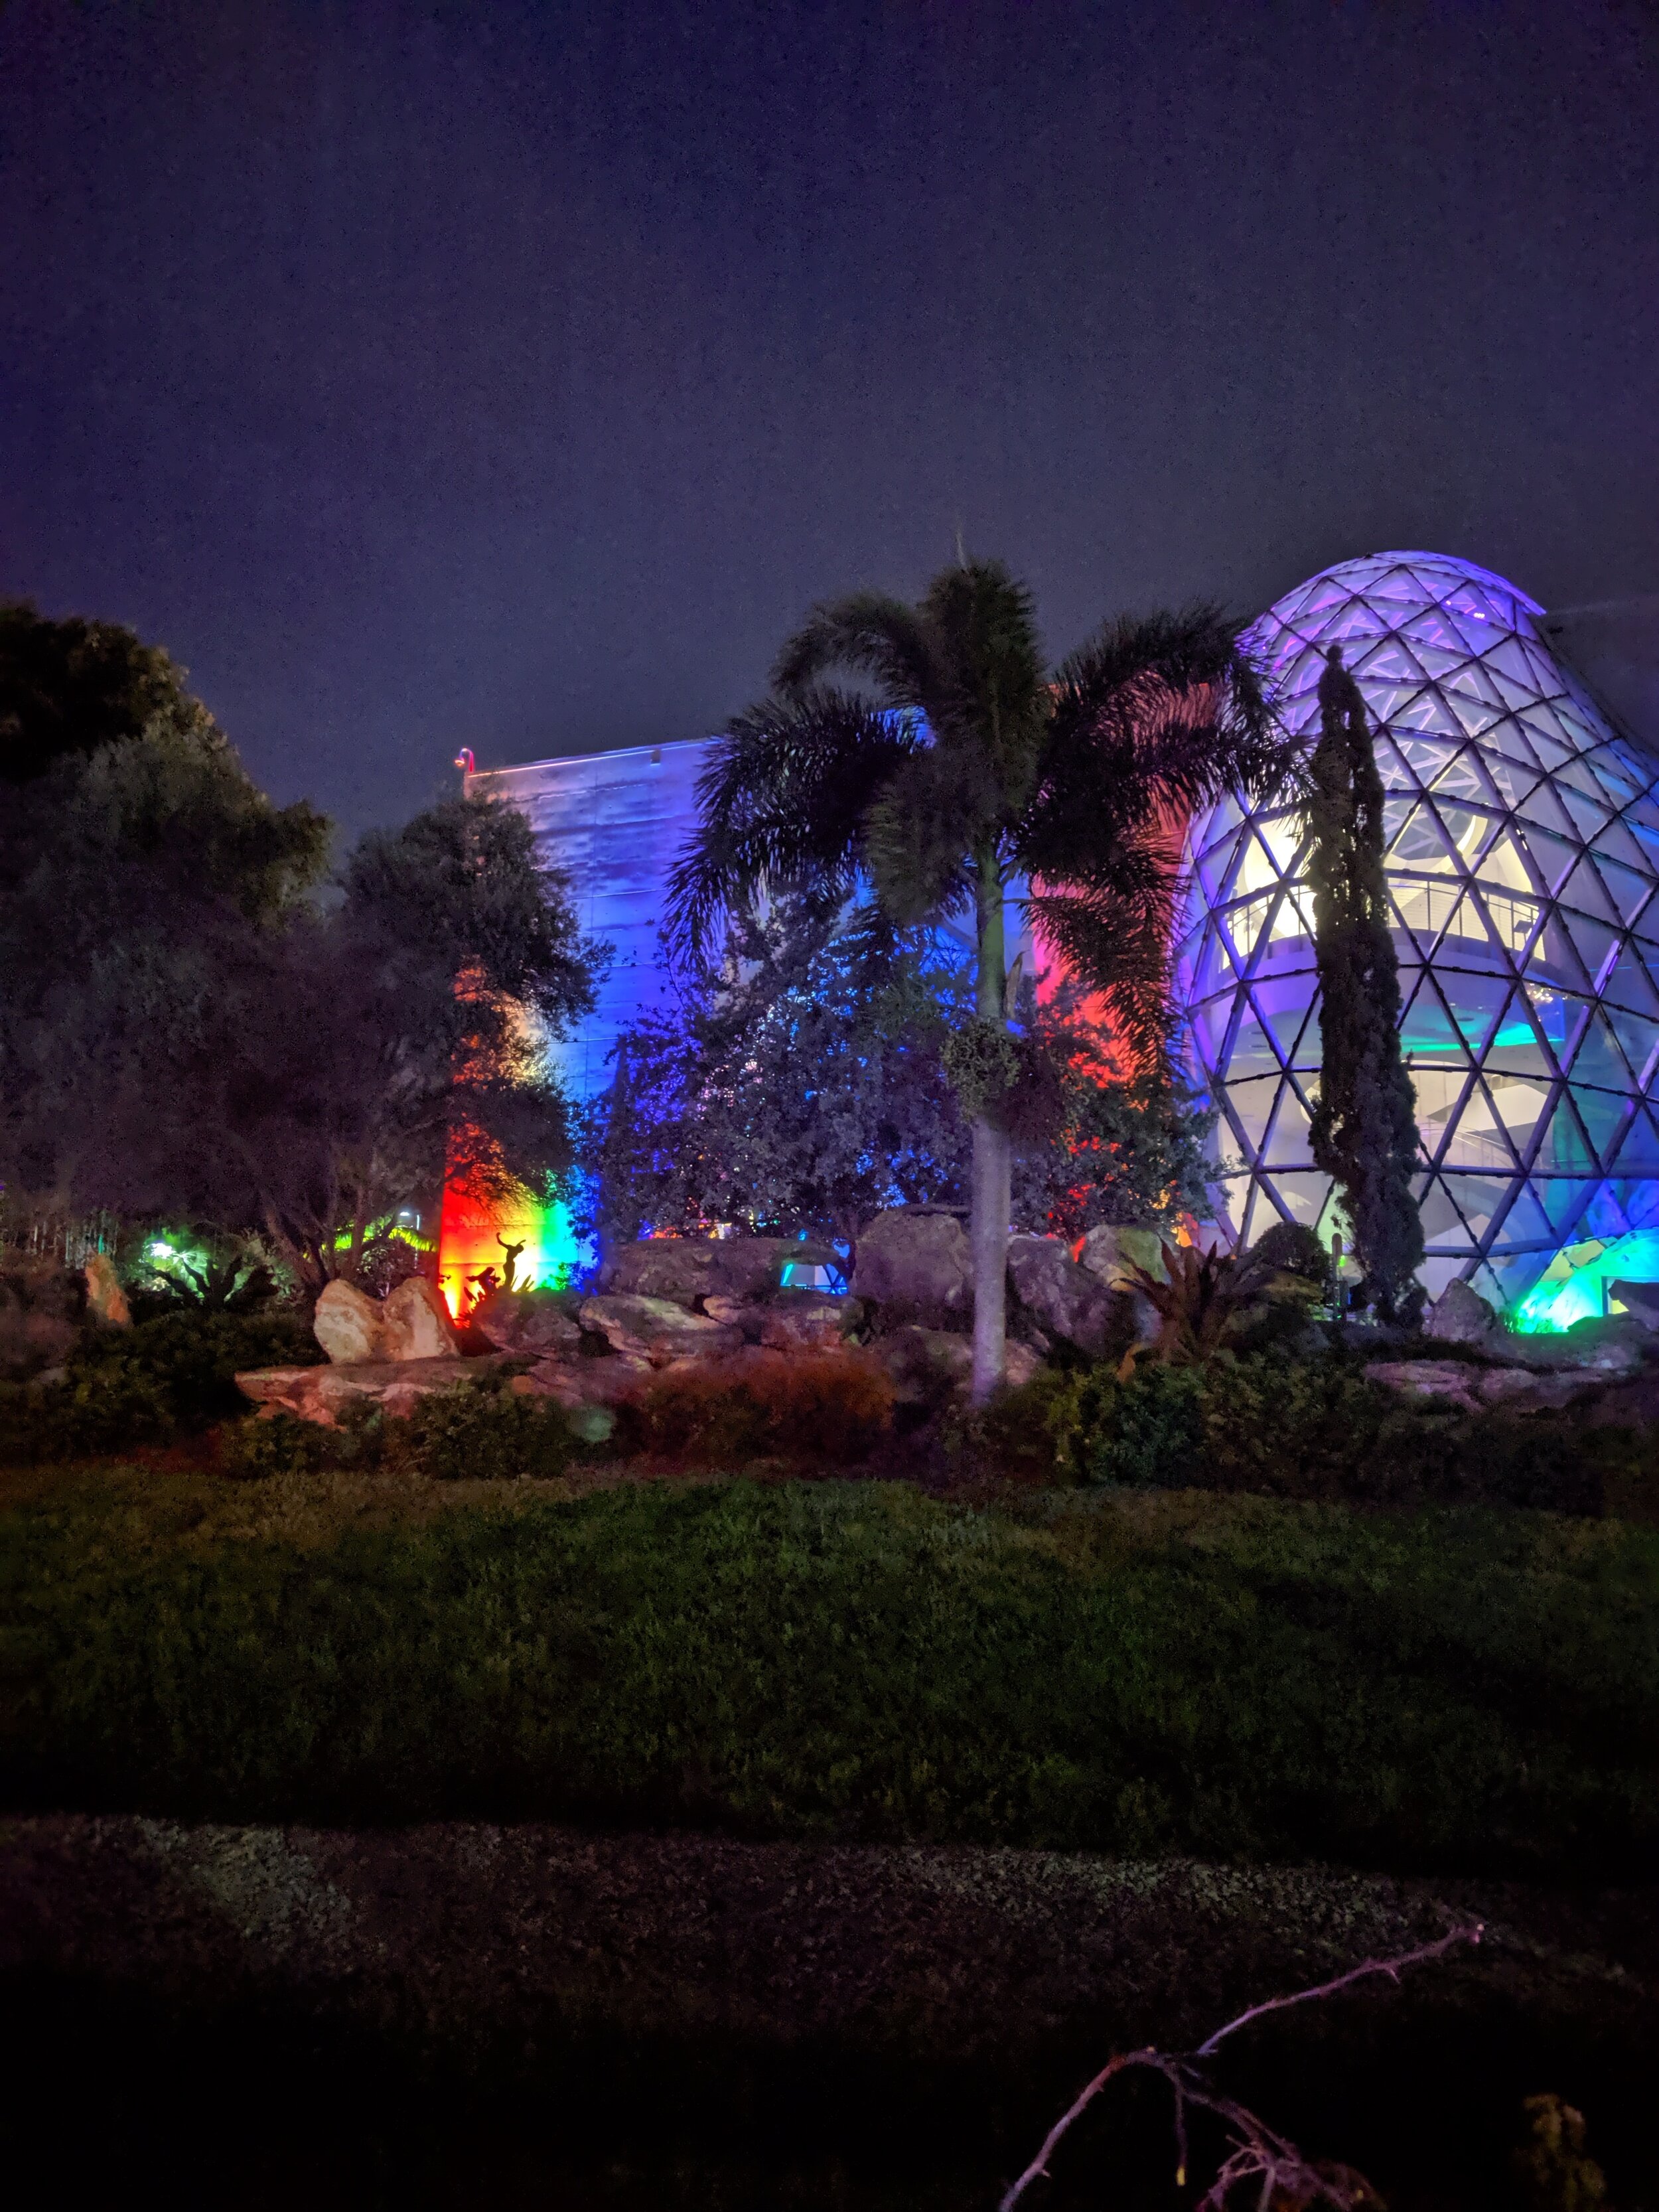  The iconic Dalî museum in St Petersburg Florida lit up in rainbow colors at night. 